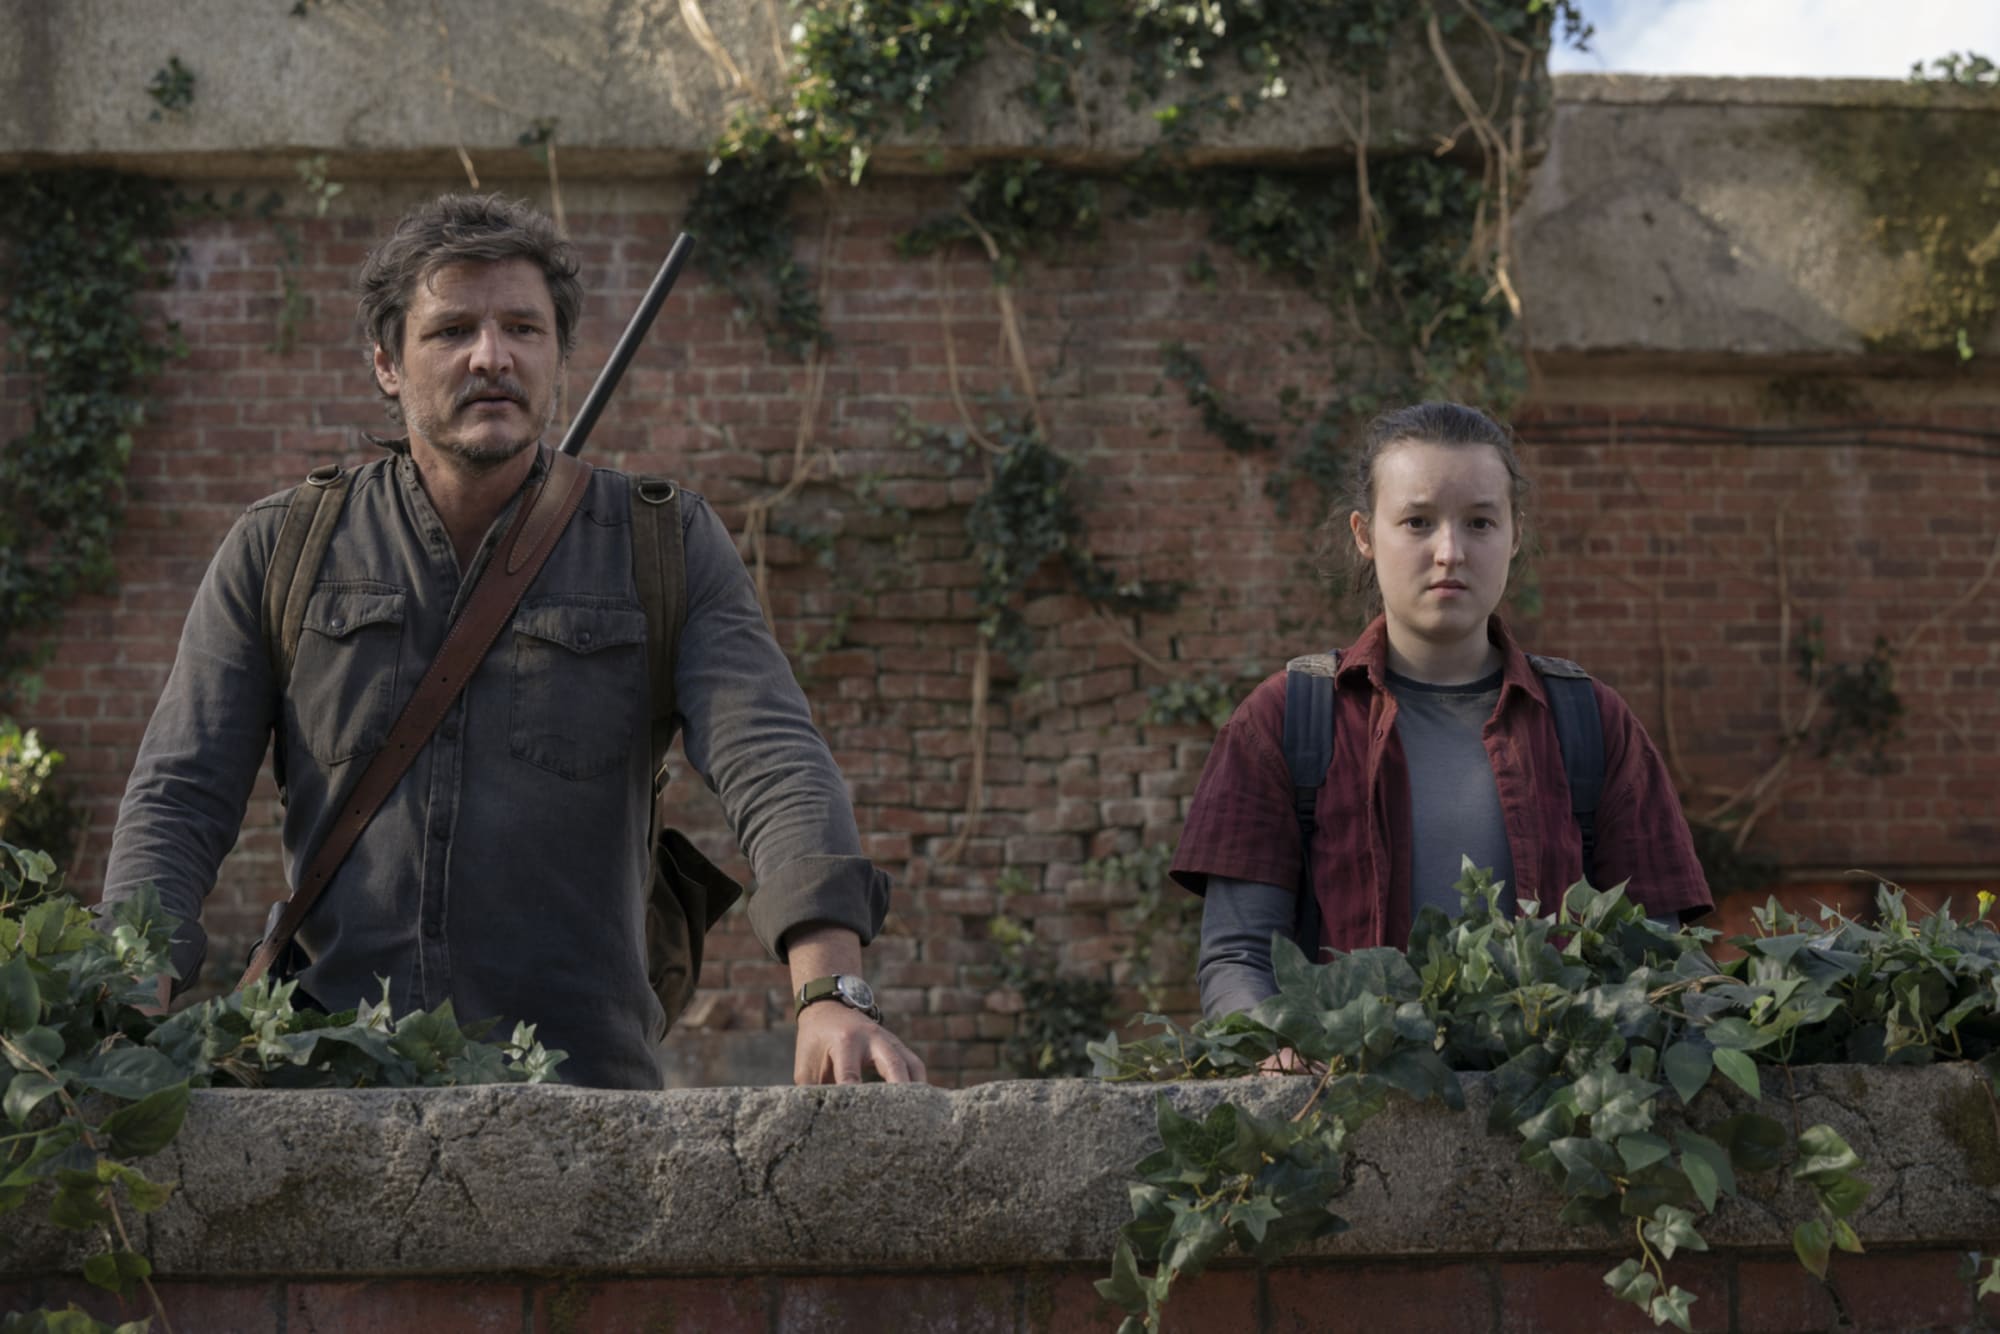 The Last of Us Season 2: Is Kaitlyn Dever Playing Abby in the TV Show?